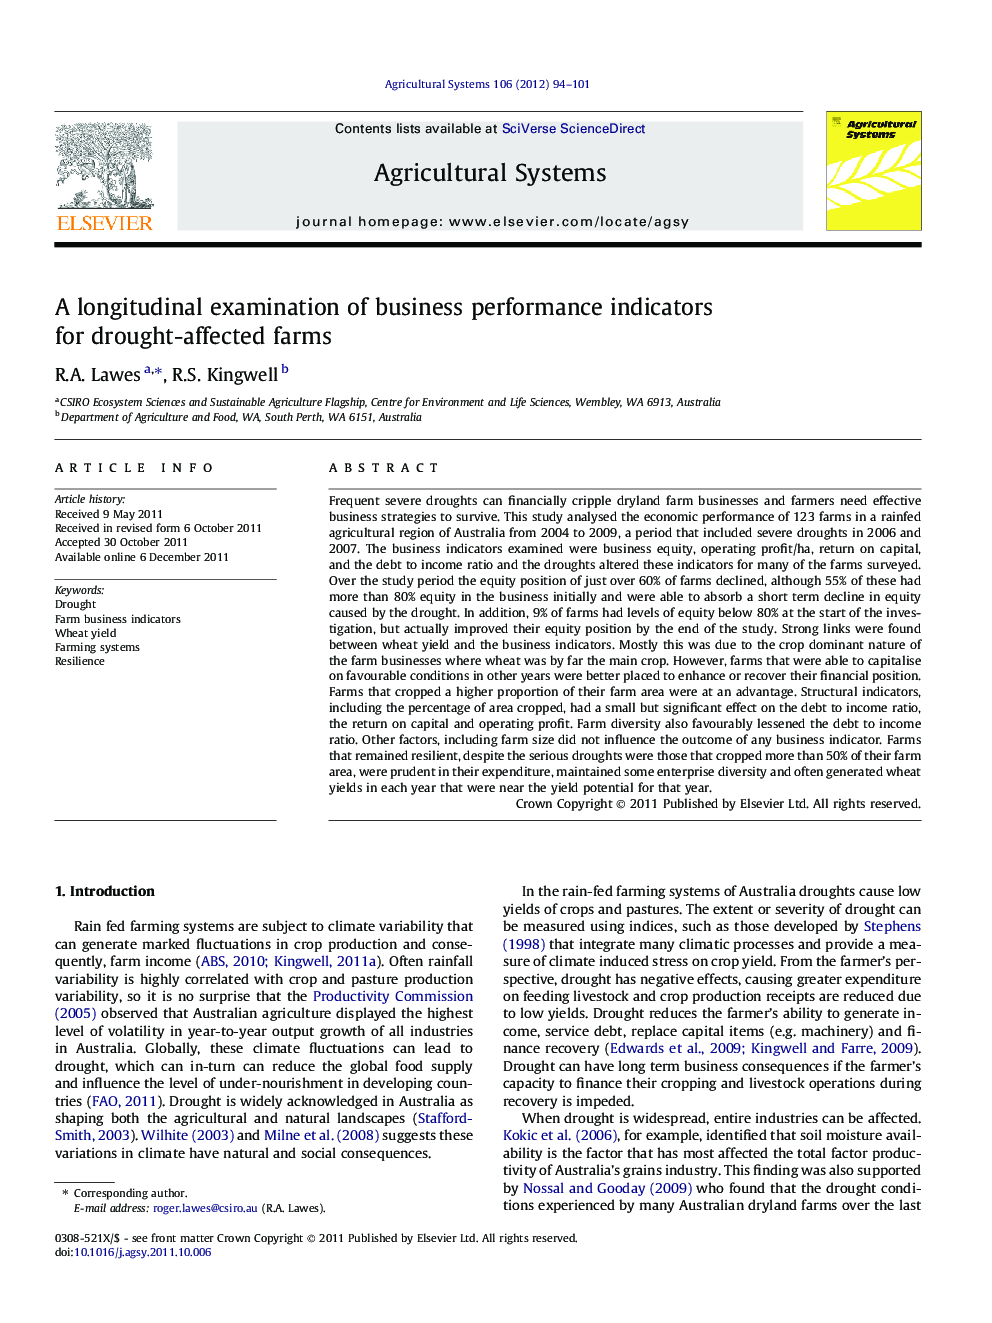 A longitudinal examination of business performance indicators for drought-affected farms